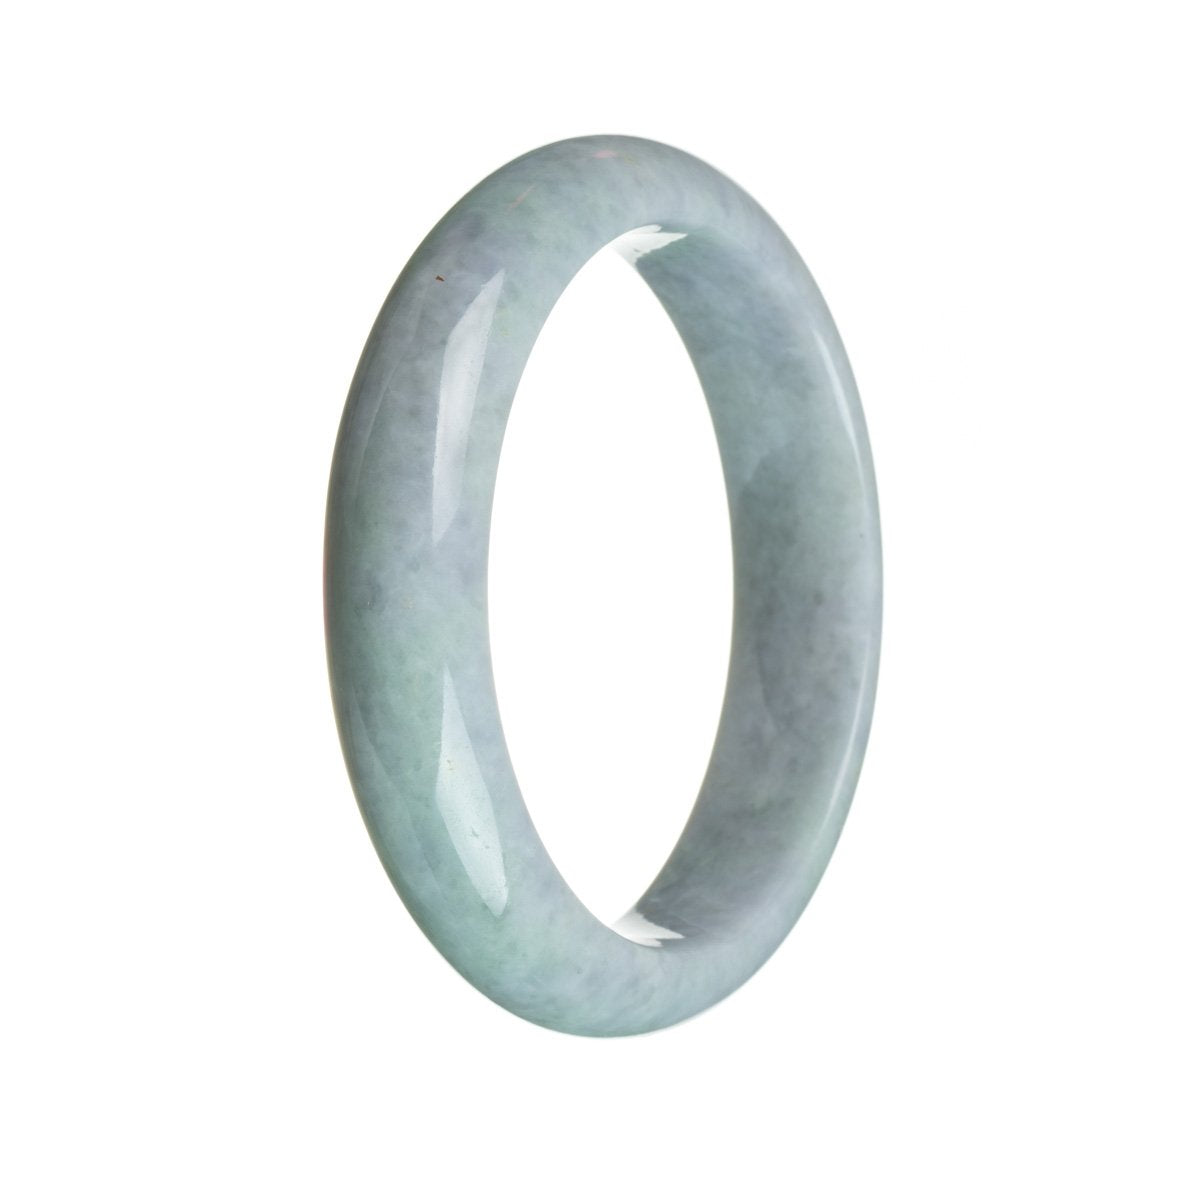 A close-up photo of an authentic Grade A greyish blue lavender Burma Jade bangle bracelet. The bracelet is in the shape of a half moon and measures 59mm in diameter. It is a beautiful piece from the MAYS™ collection.